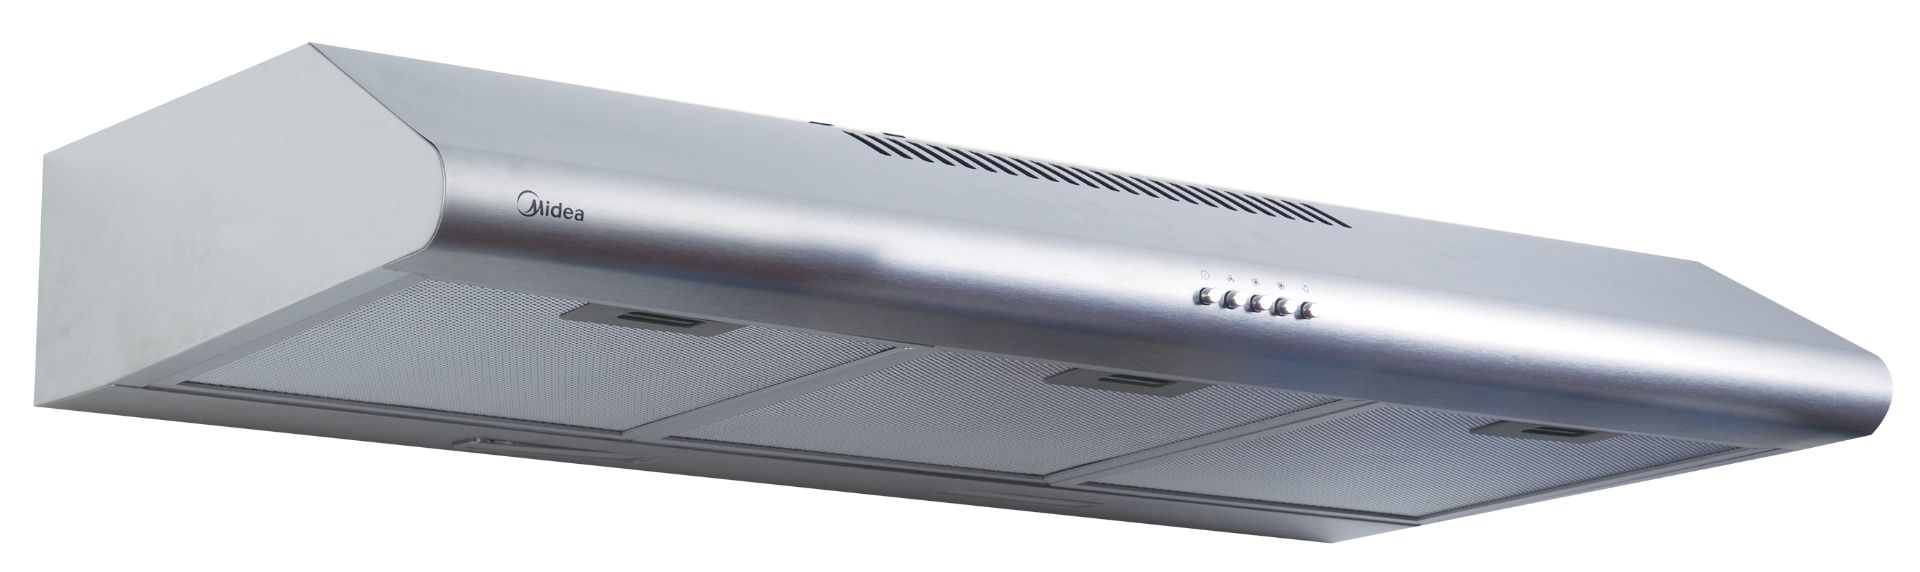 900m3/hr Stainless Steel Cooker Hood - MCH-90F49SS